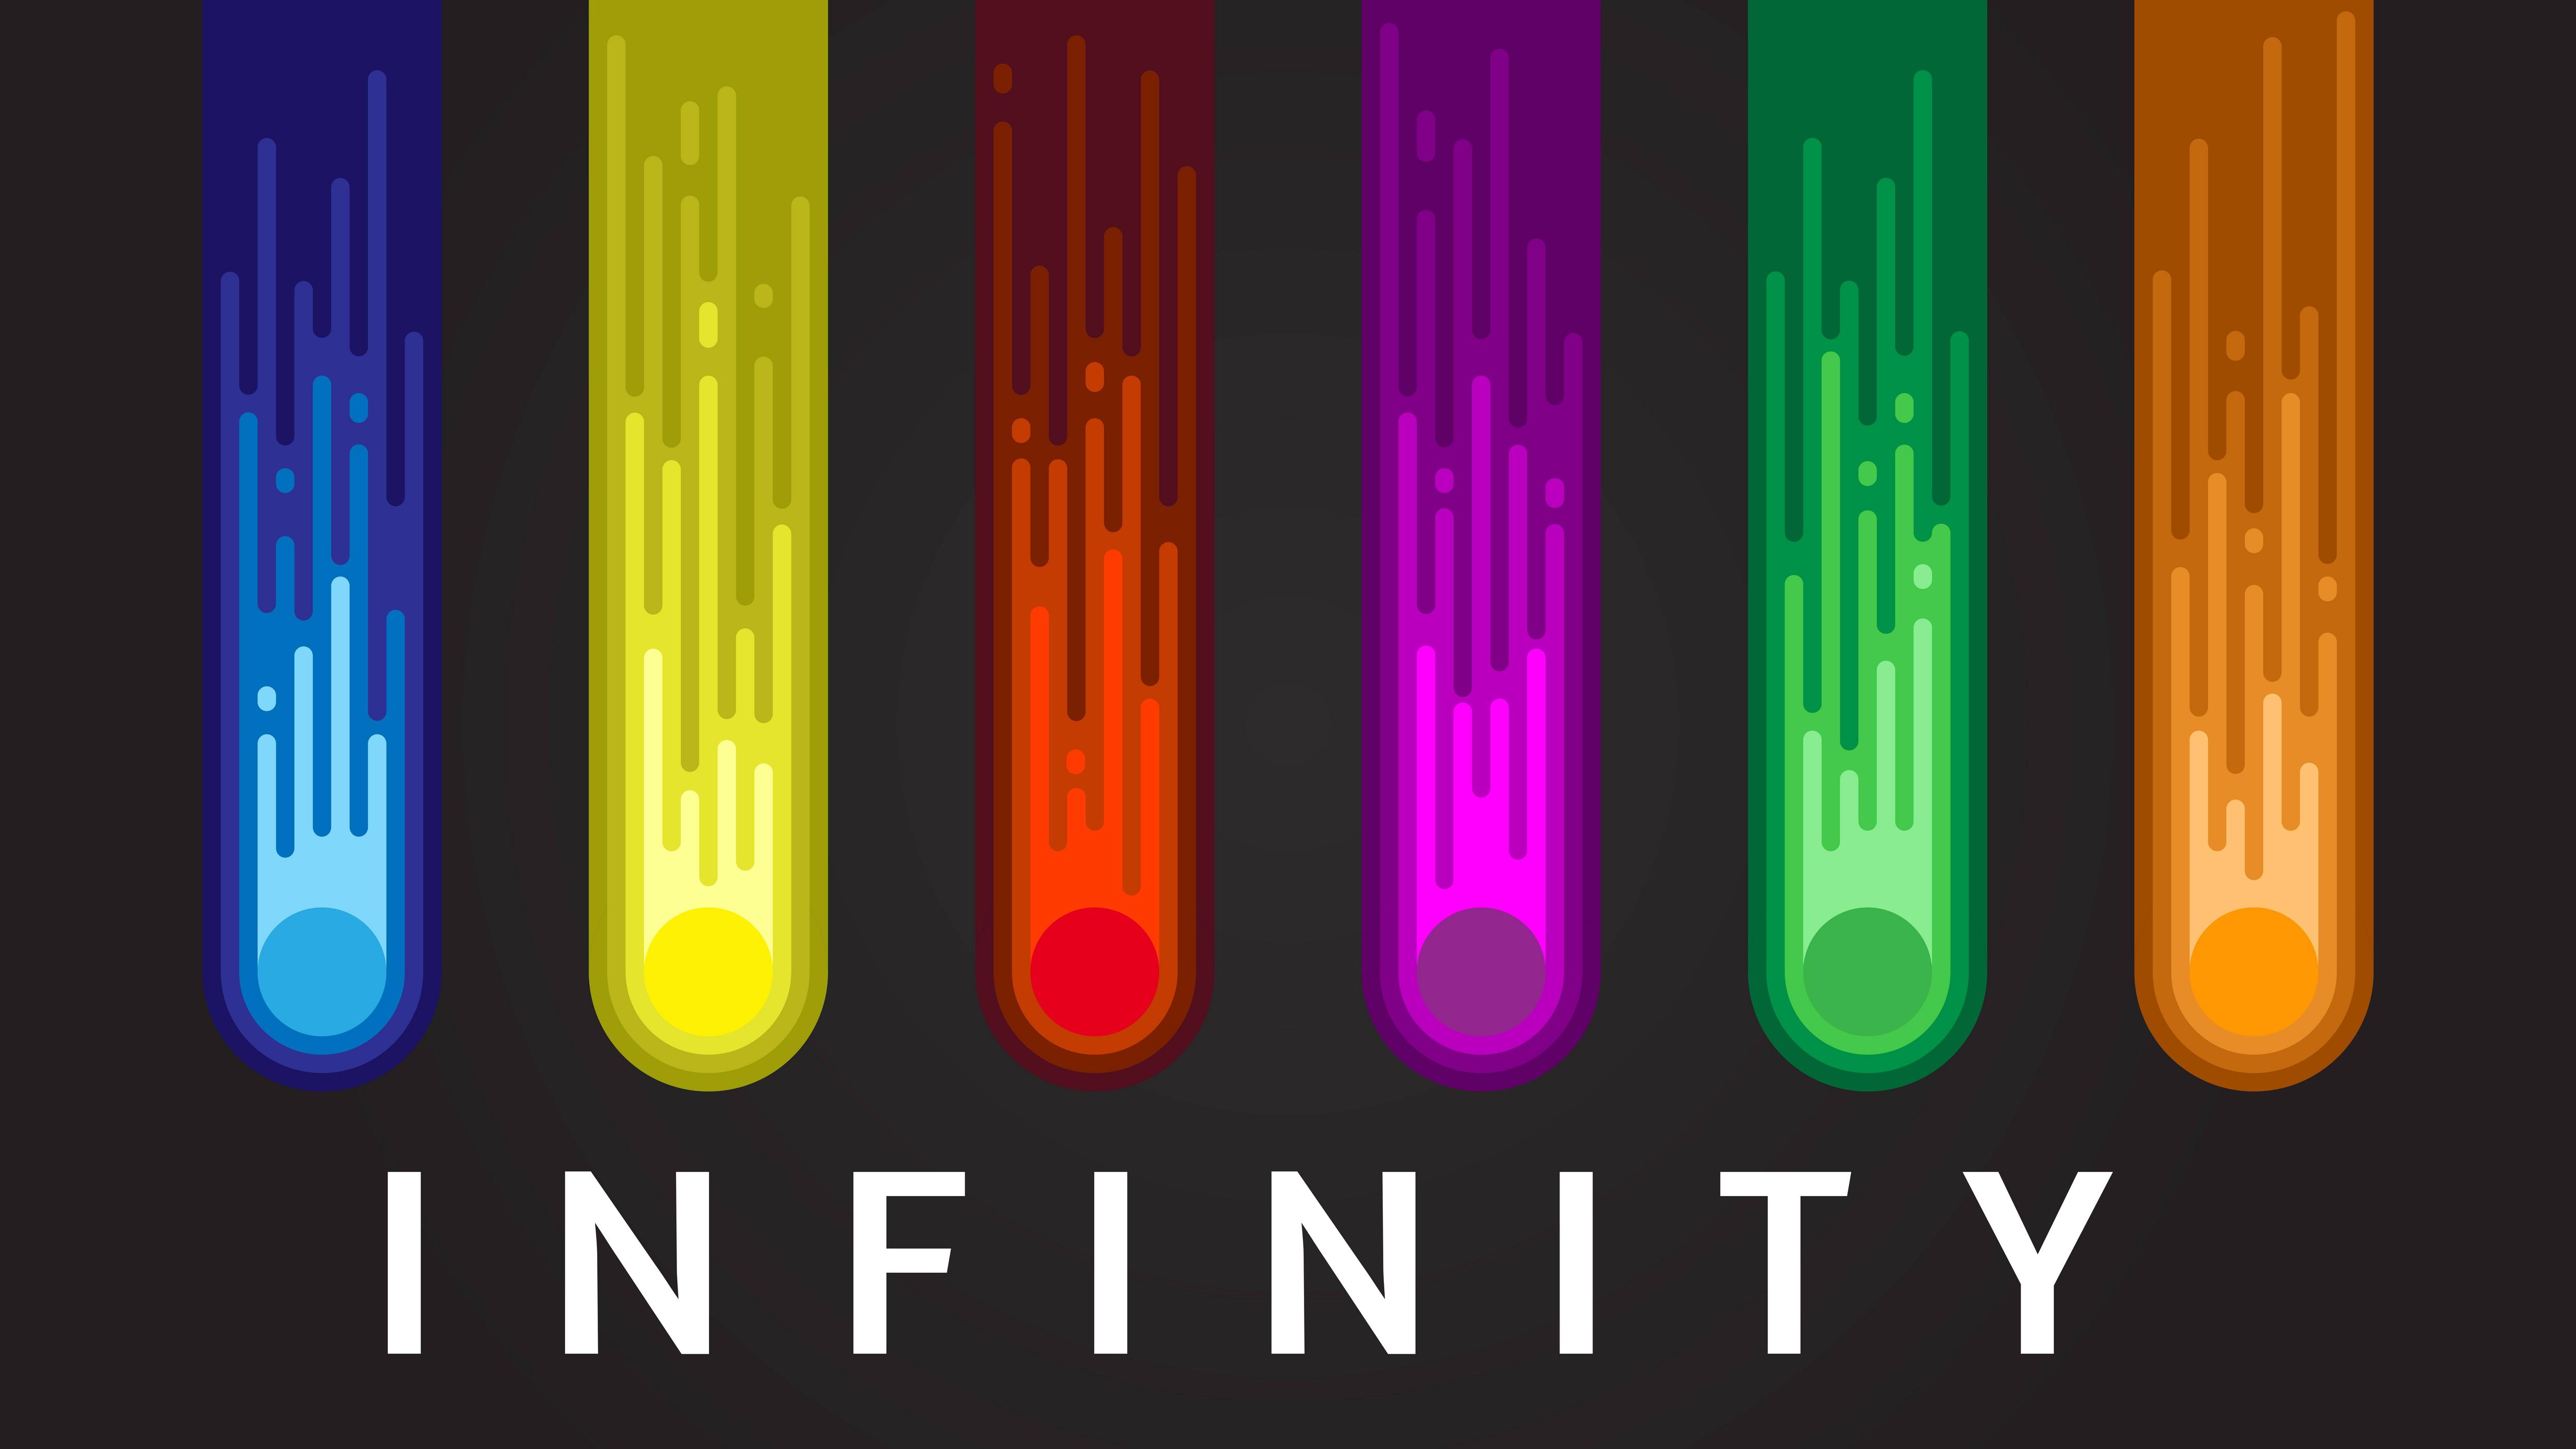 Infinity stones wallpaper by Amansingh216  Download on ZEDGE  64f3